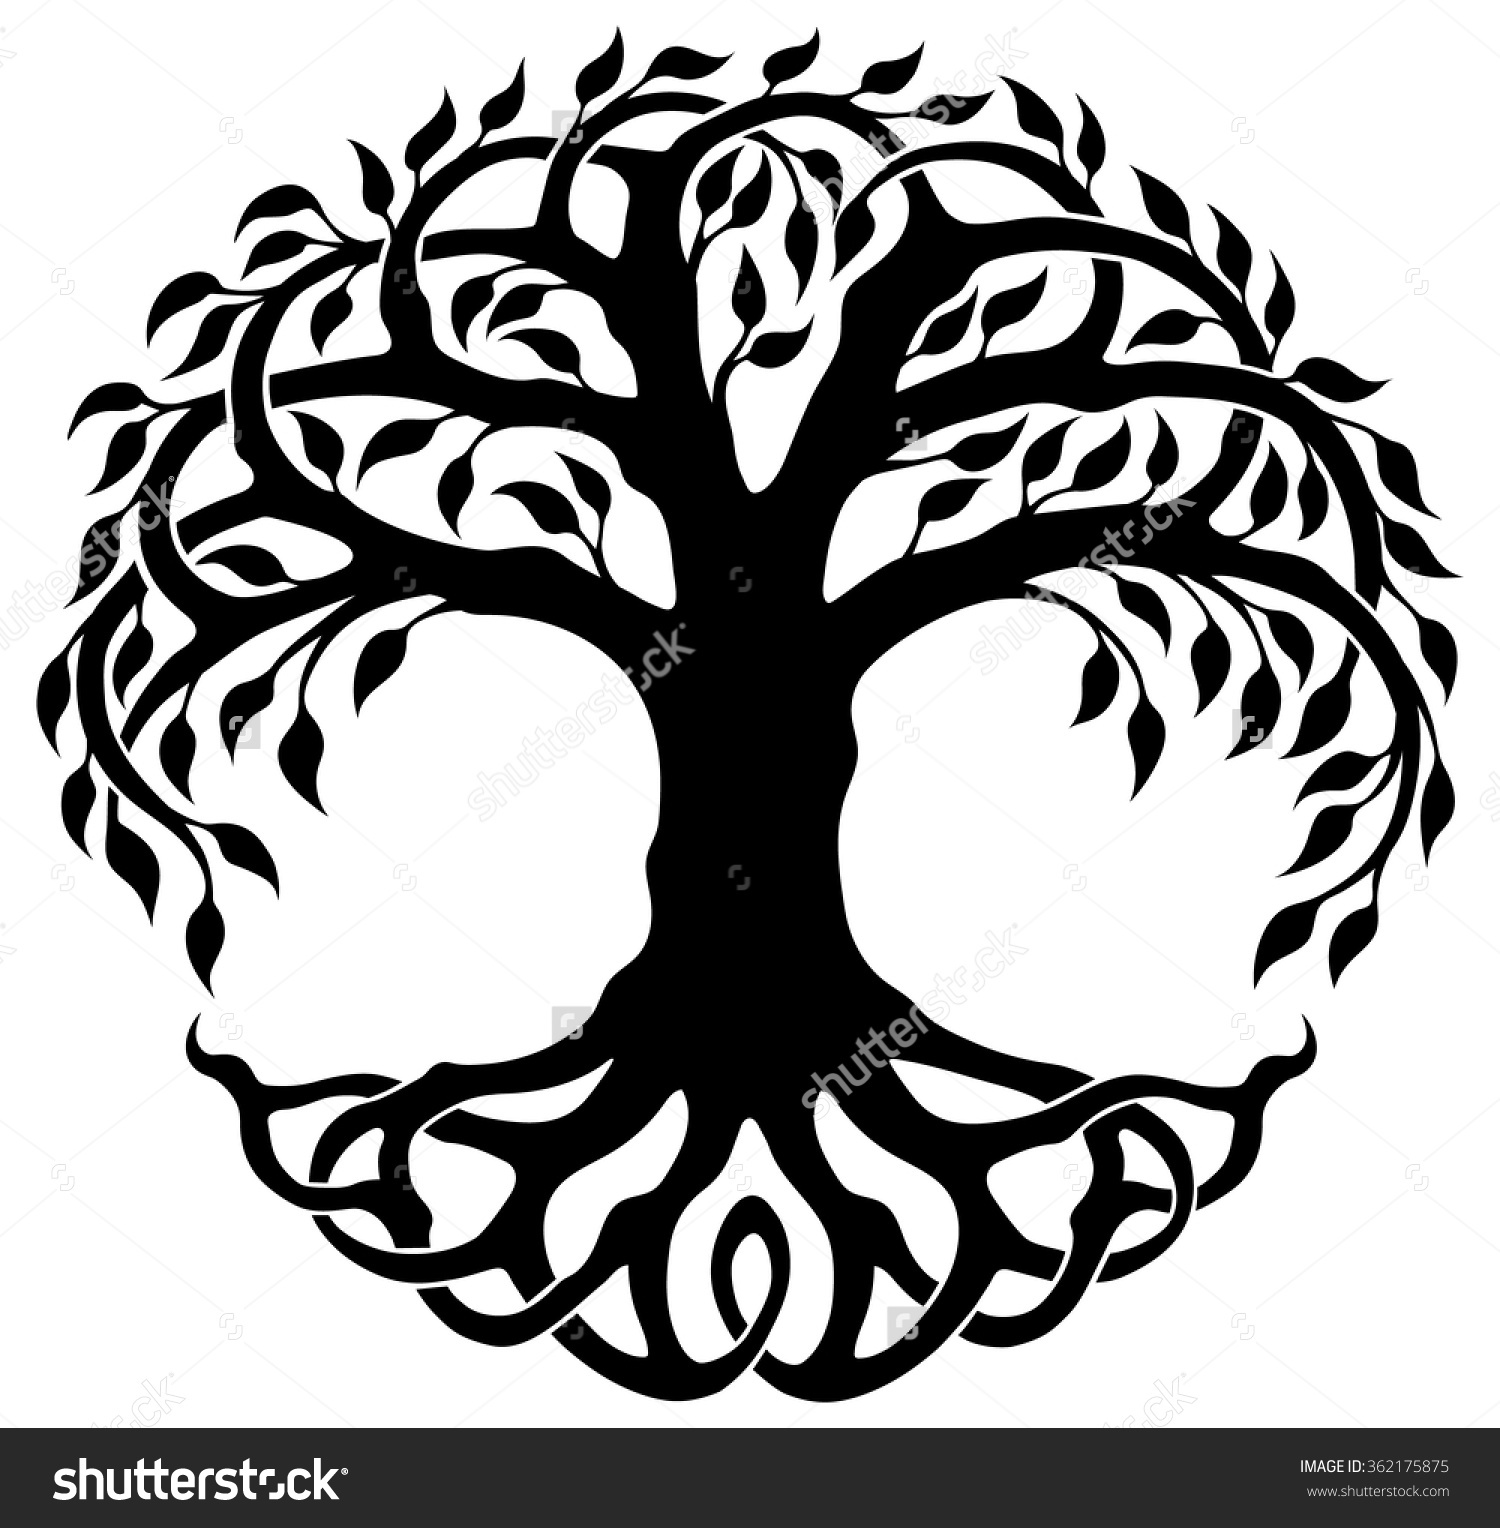 Tree Of Life Silhouette Clip Art.